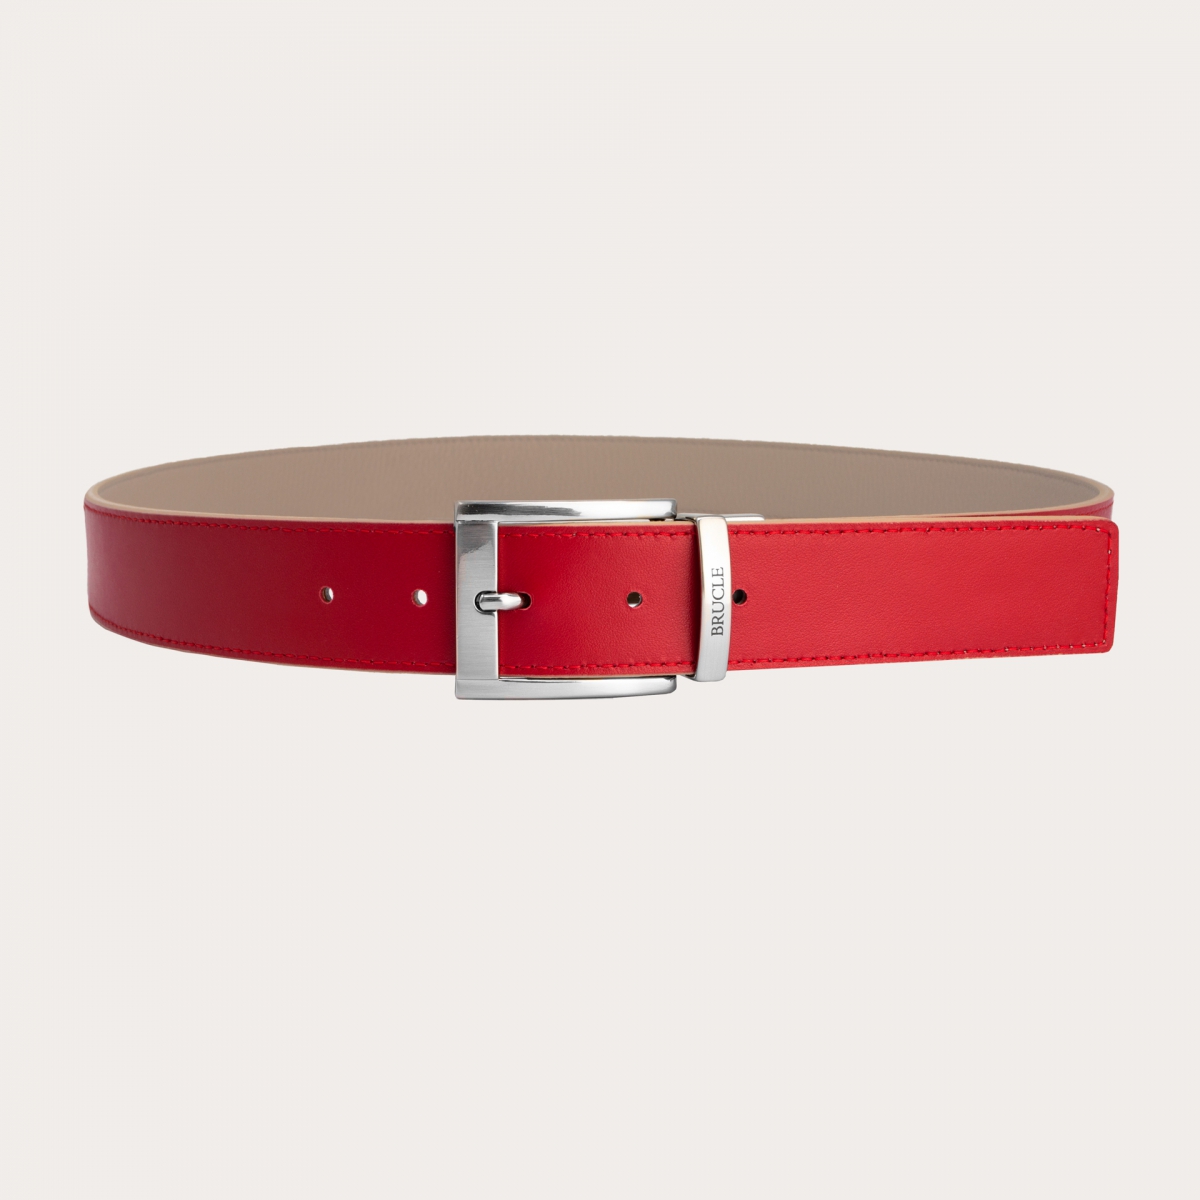 Reversible leather belt dove gray and red square tip